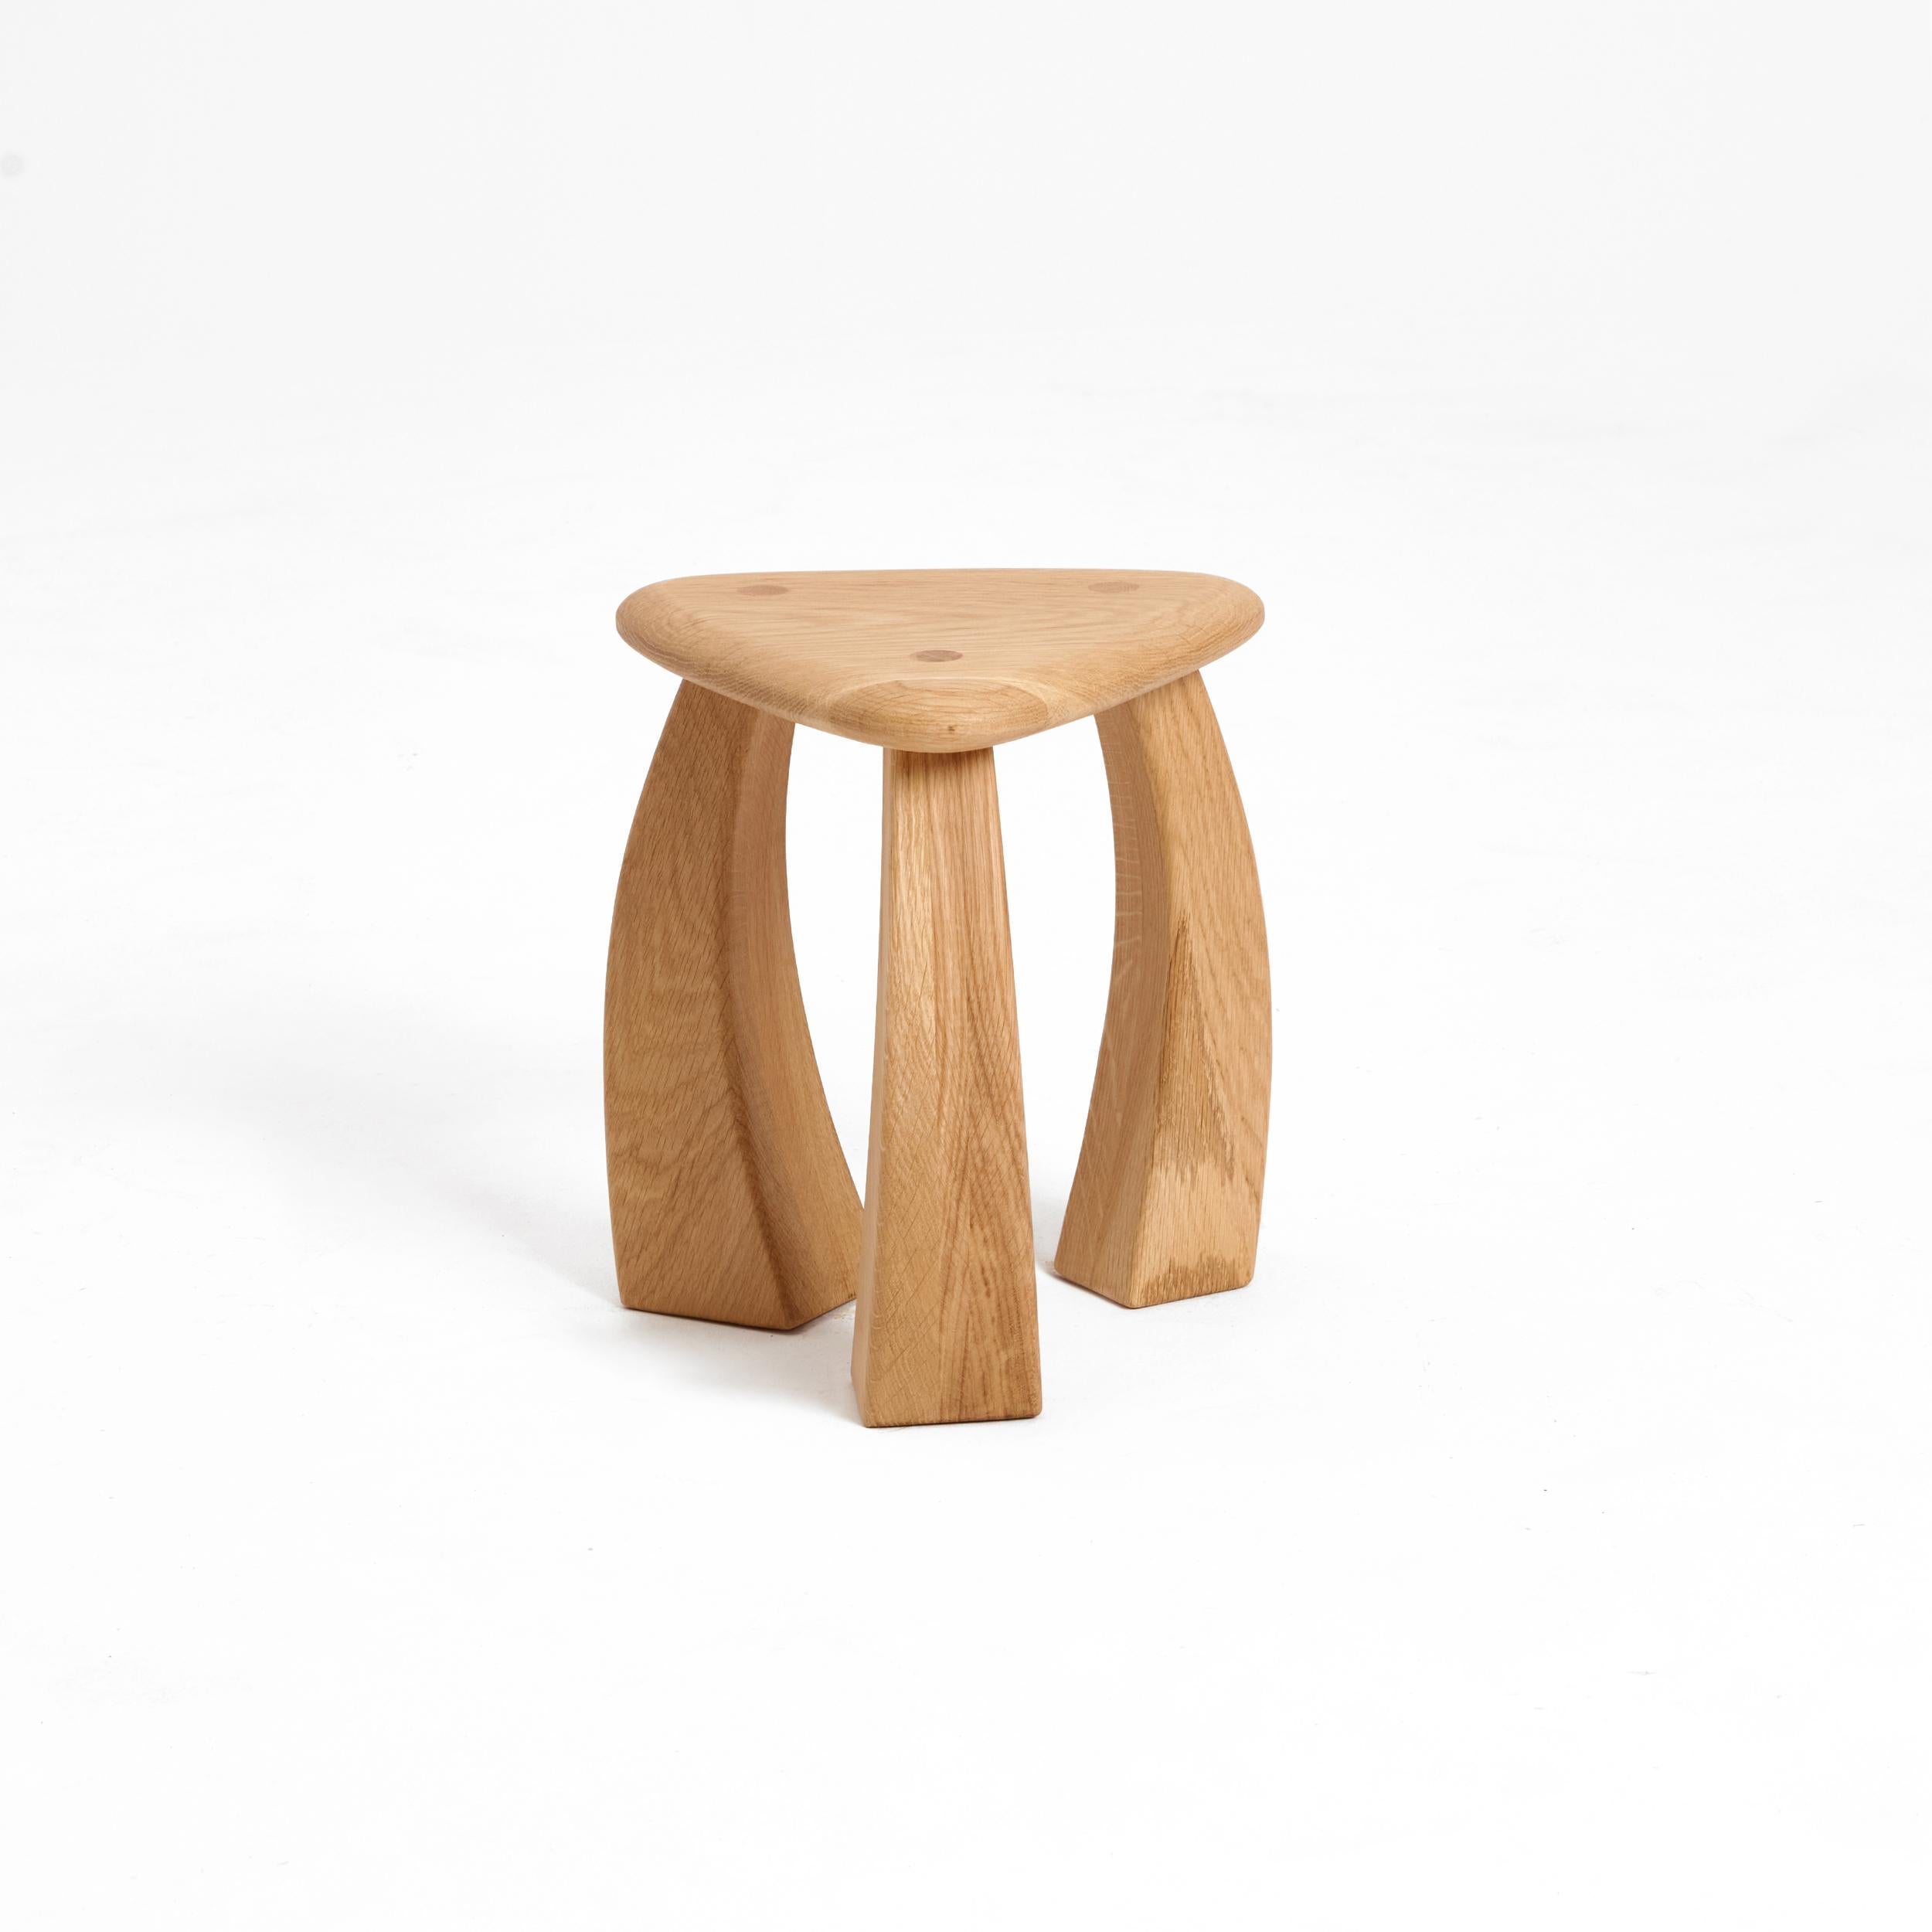 Arc de stool 37 in Natural Oak by Project 213A
Dimensions: D 33 x W 33 x H 37 cm
Materials: Oak wood. 

The smaller version of the stool's legs curves inwards towards its triangular seat, fusing to showcase exquisite craftsmanship. The elegant